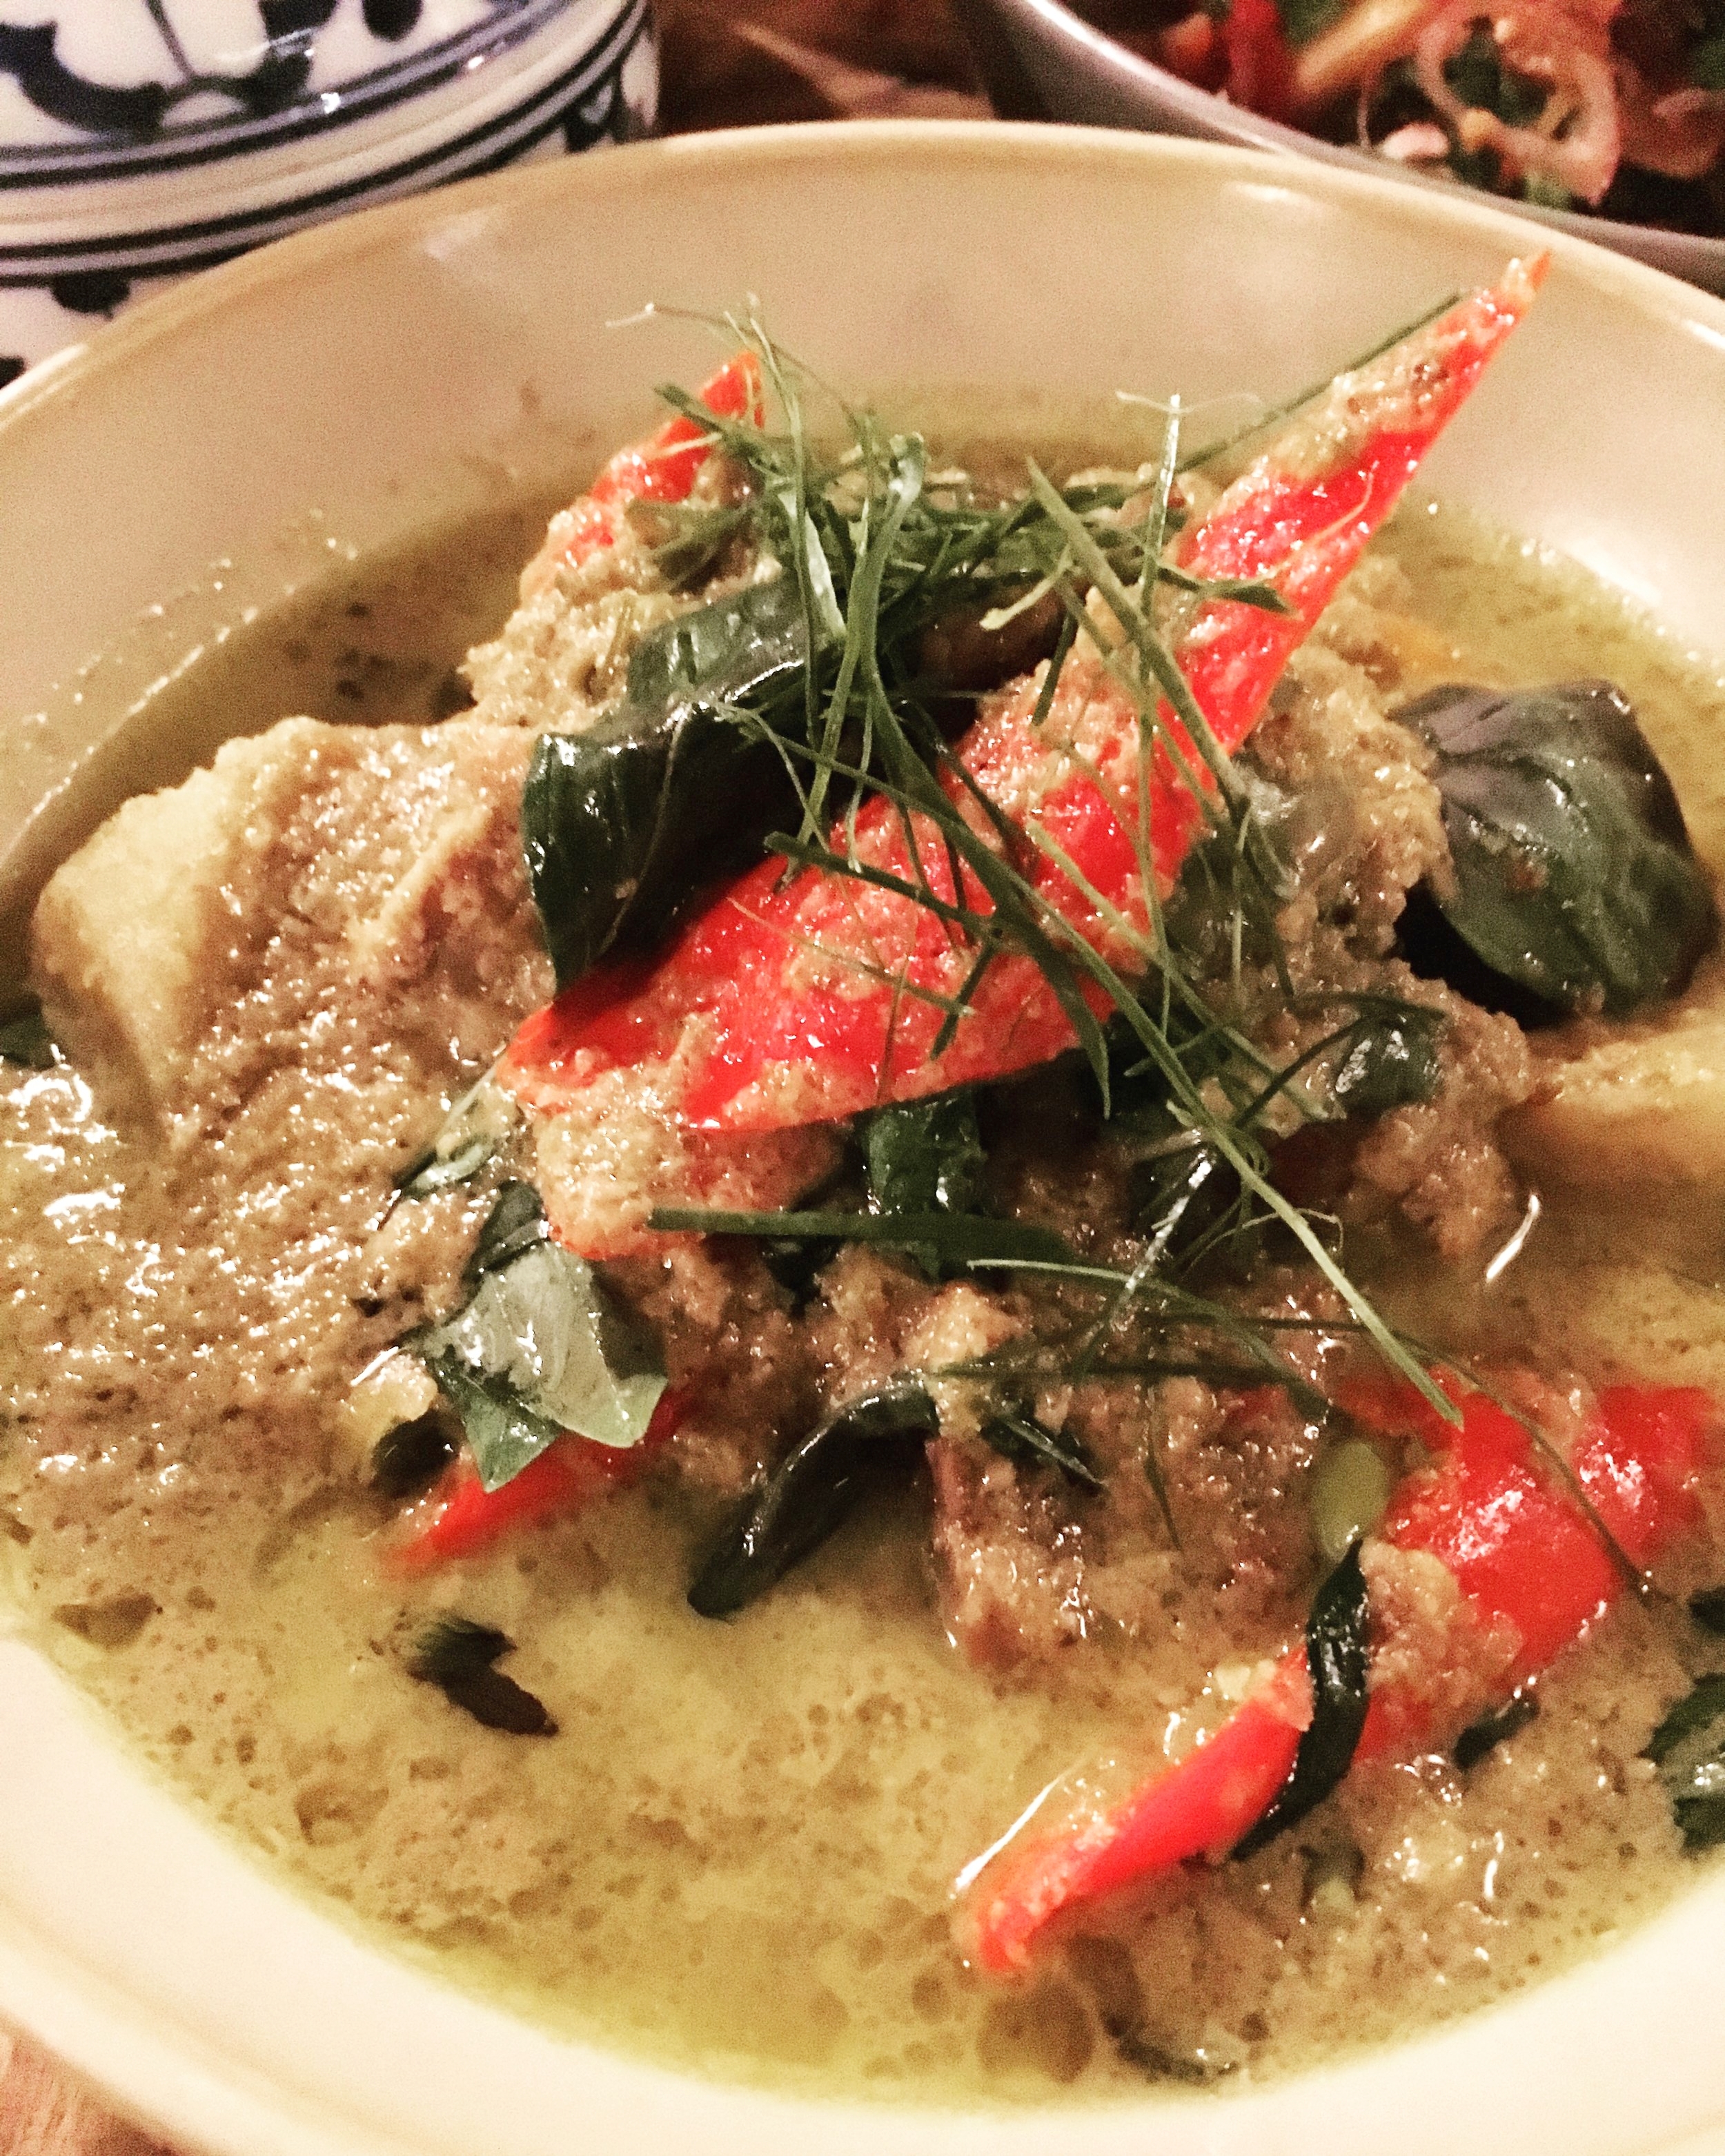 Goat Green Curry with Aubergine and Green Banana